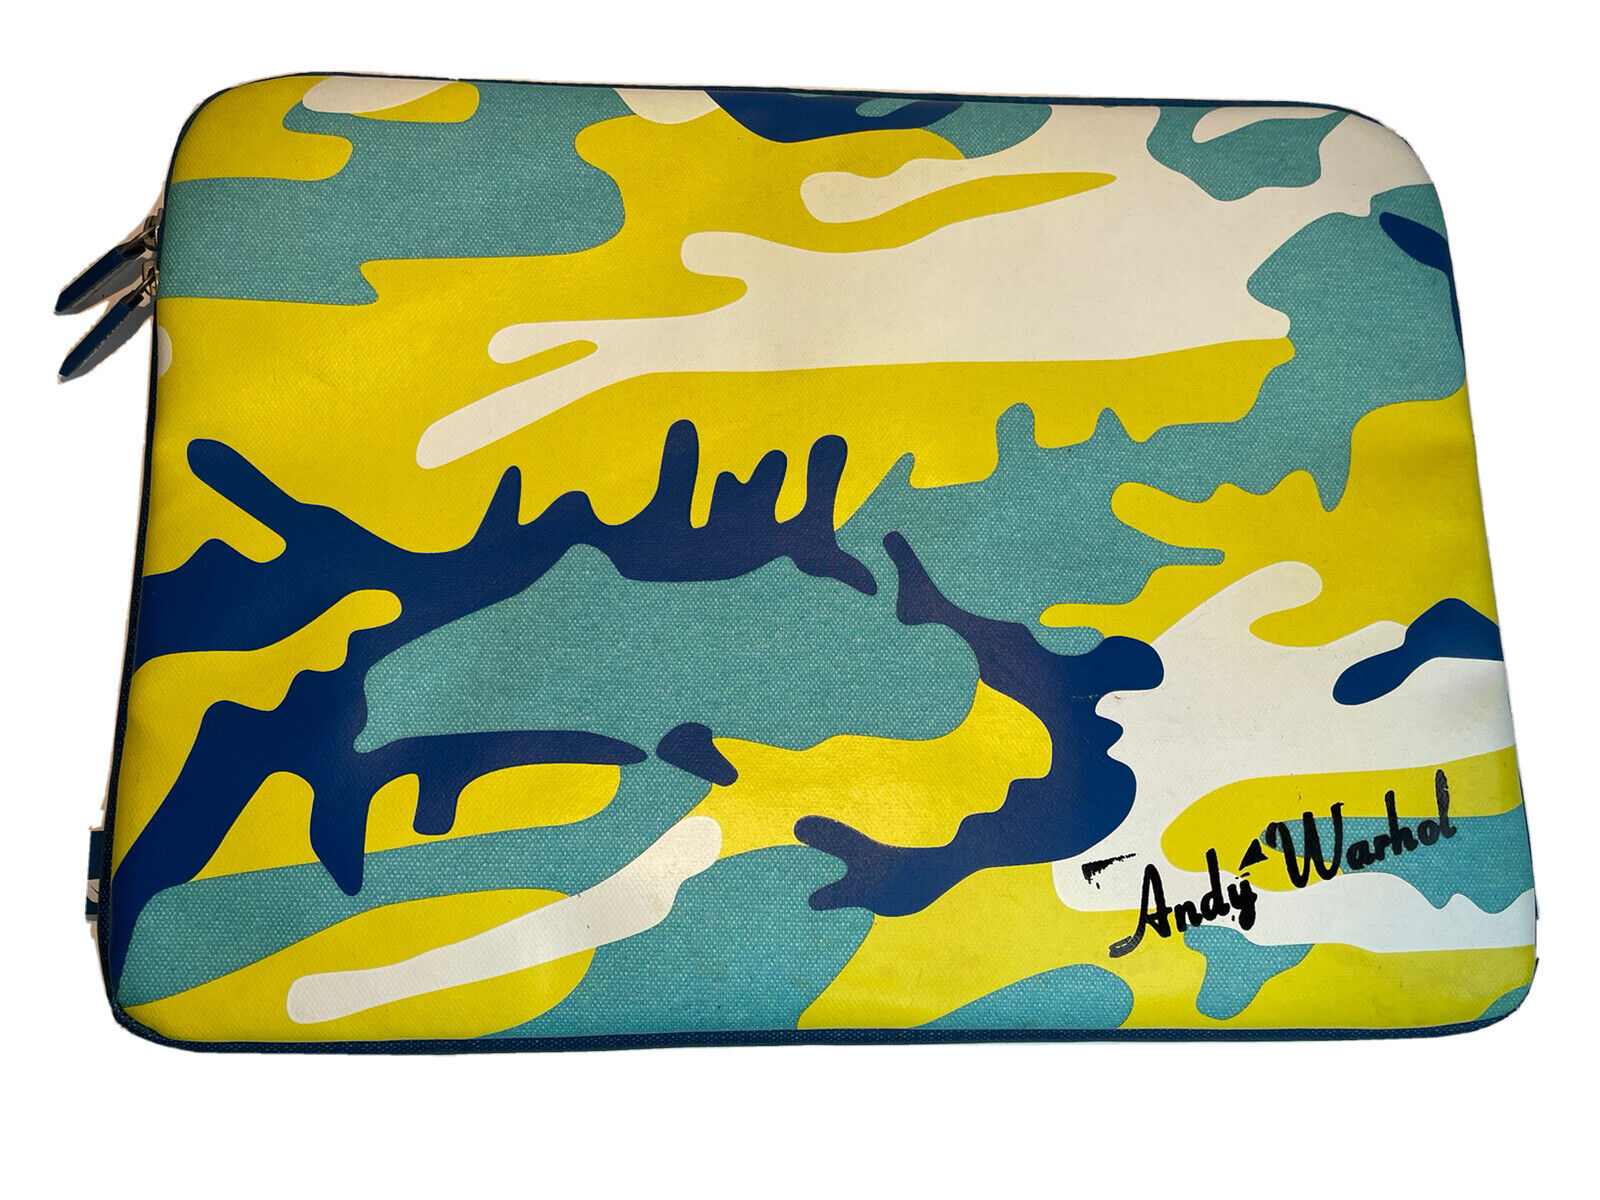 Incase For Andy Warhol Laptop Sleeve Camouflage Padded Zip Mac Air Pro